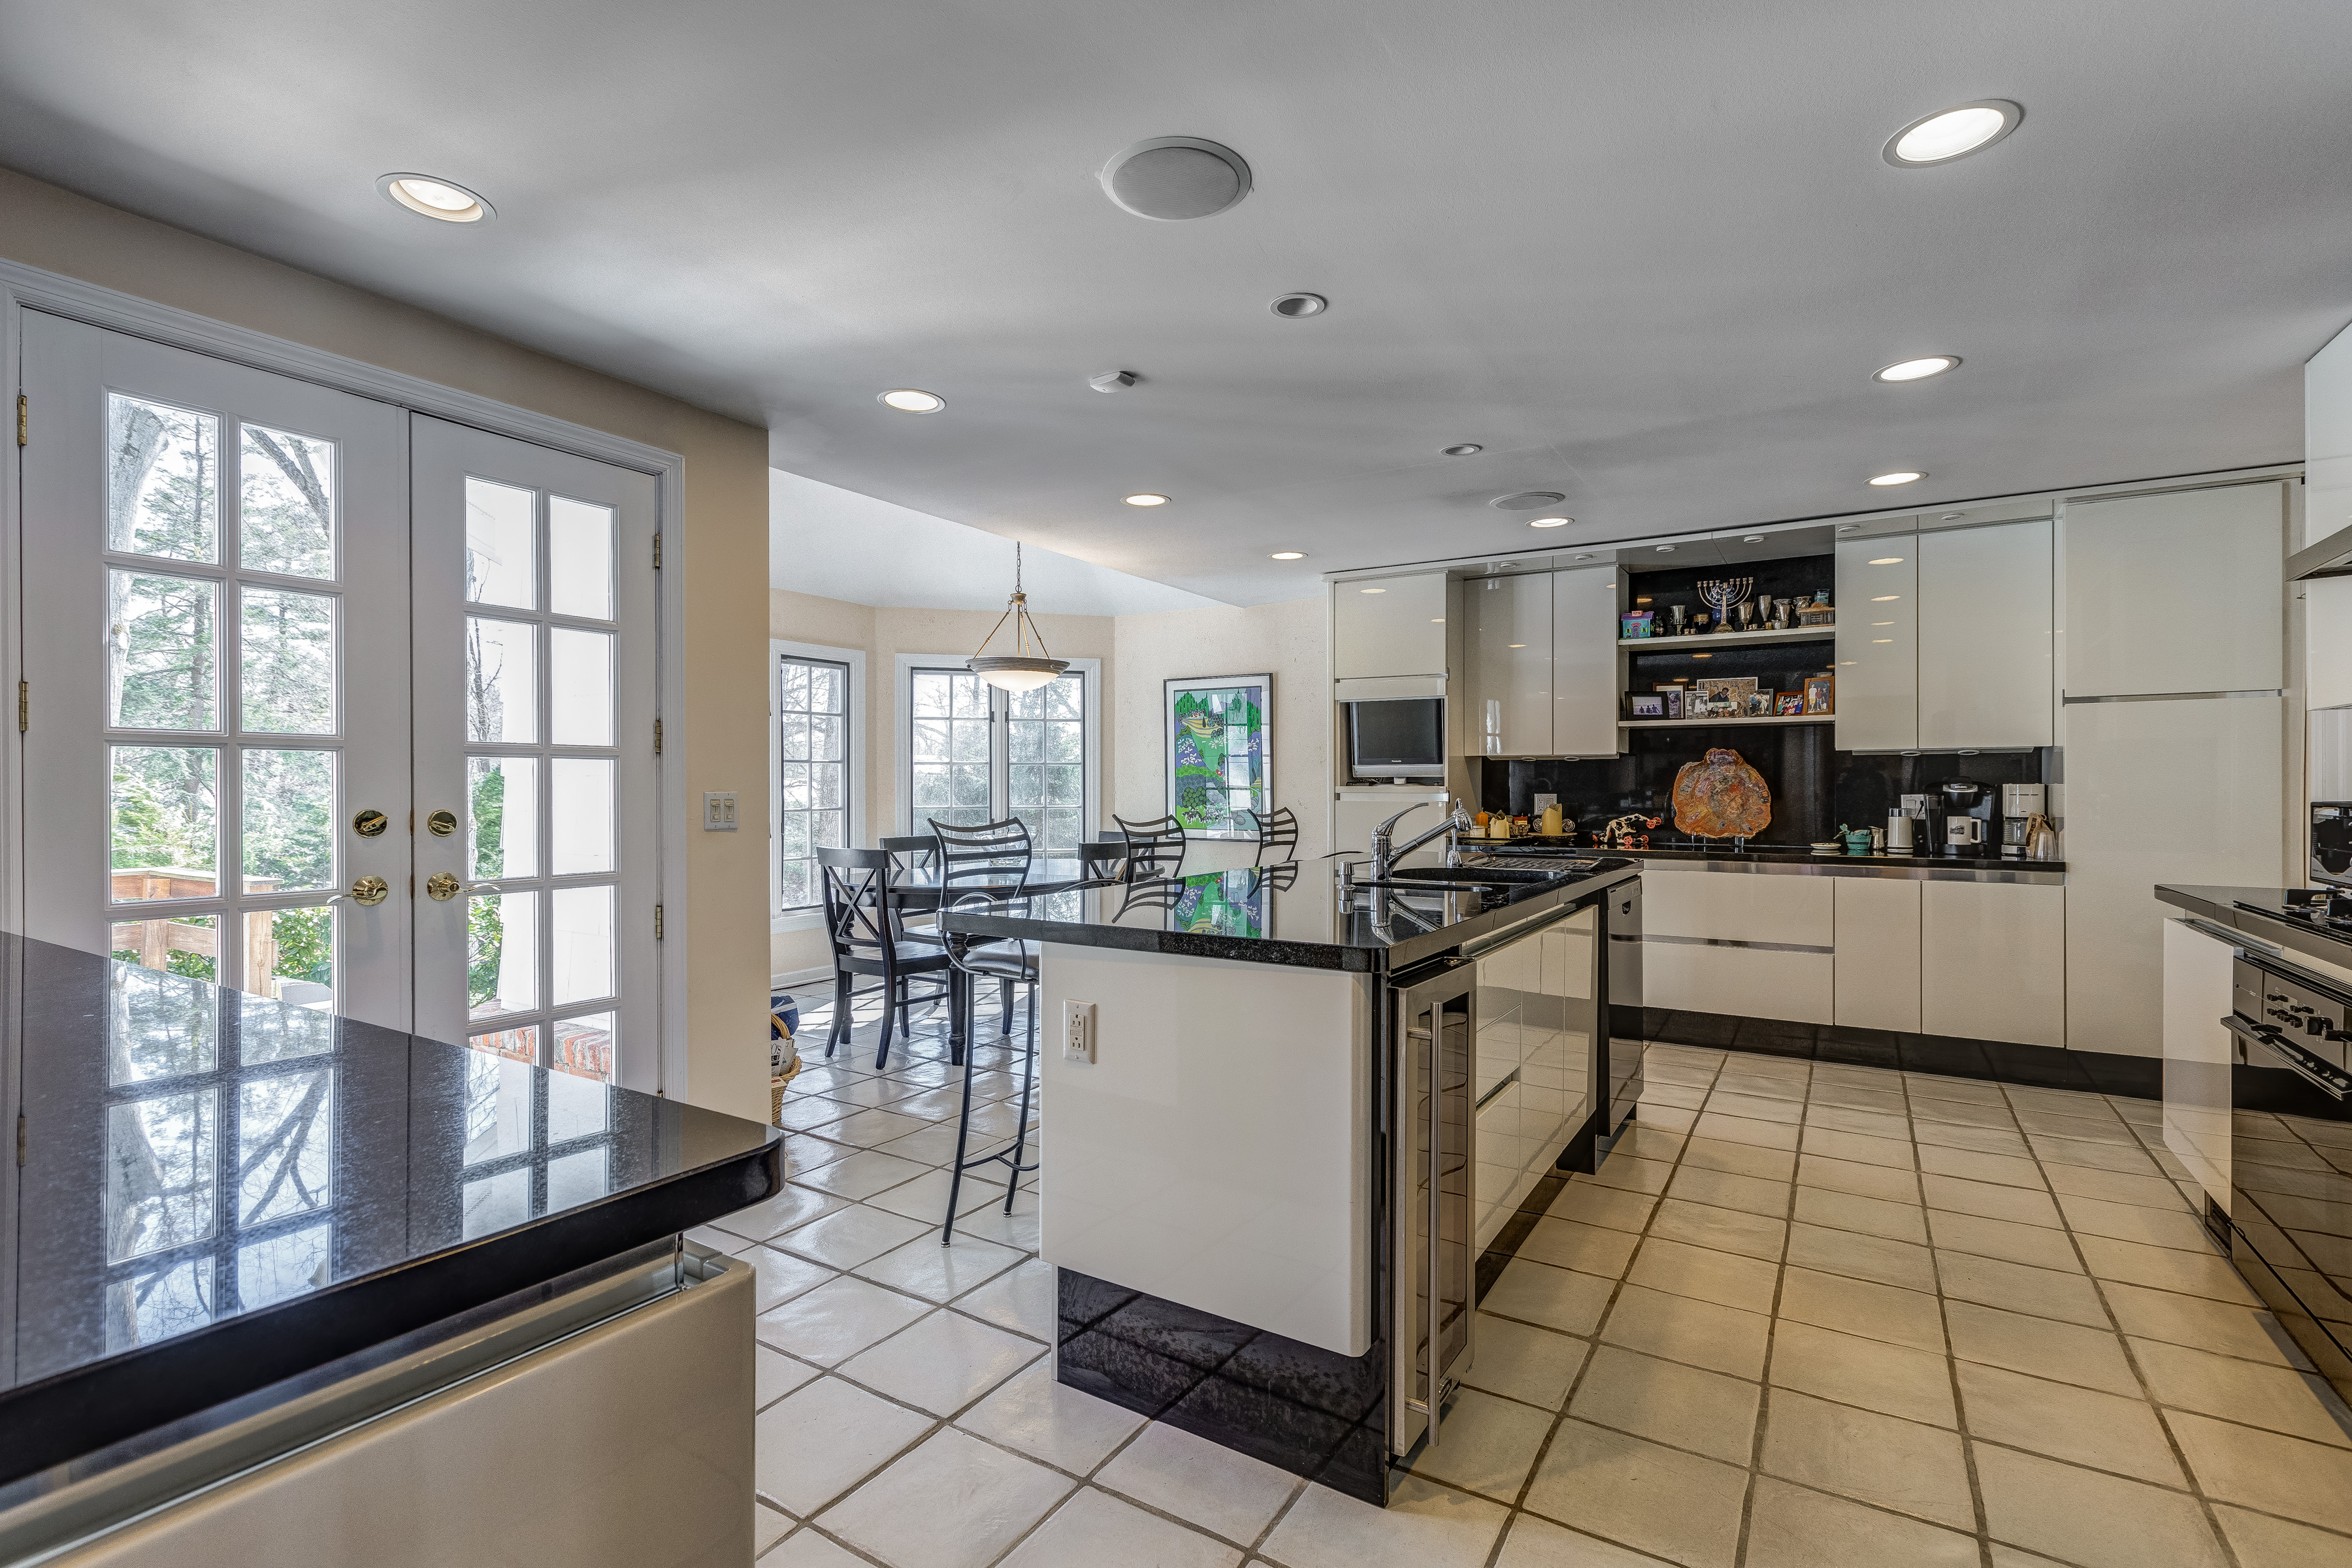 8 – 44 Slope Drive – Gourmet Eat-in Kitchen